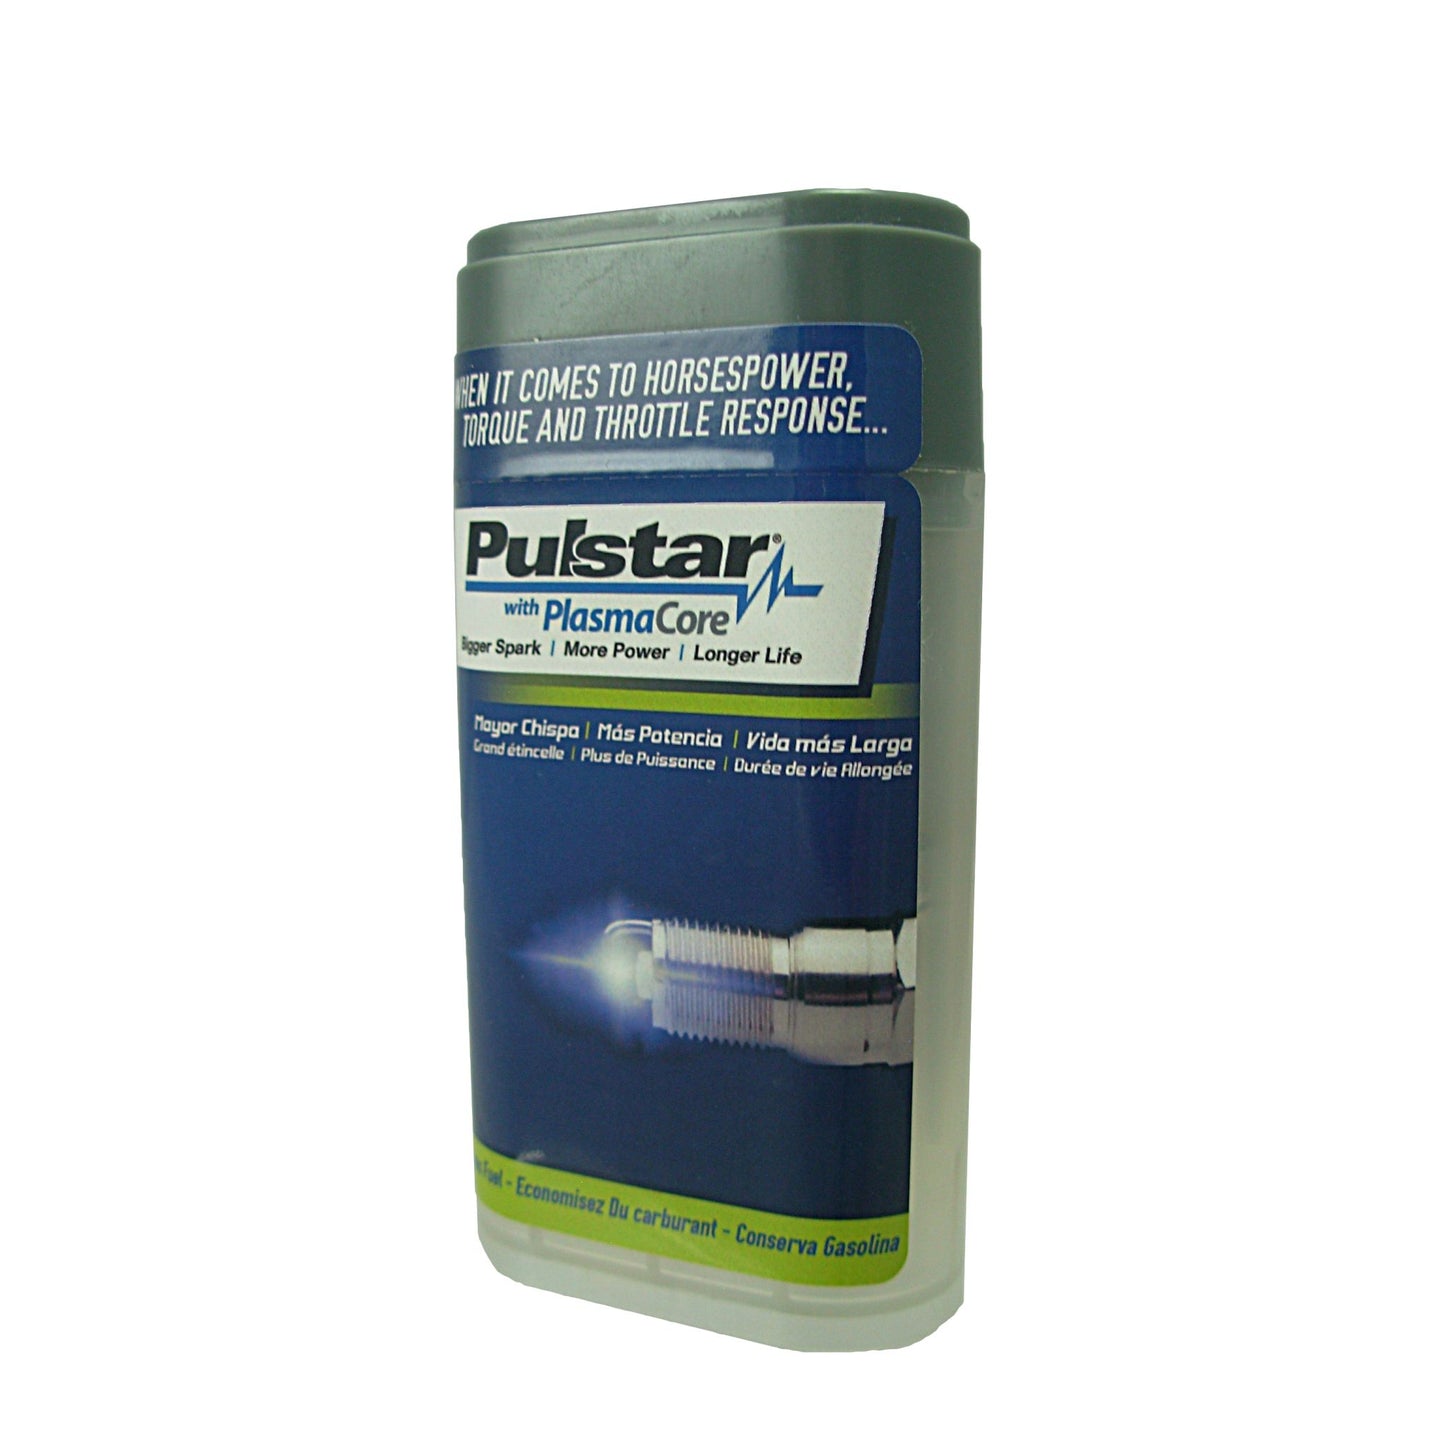 Pulstar Plasmacore SE2T8 High-Powered Spark Plug Replacement